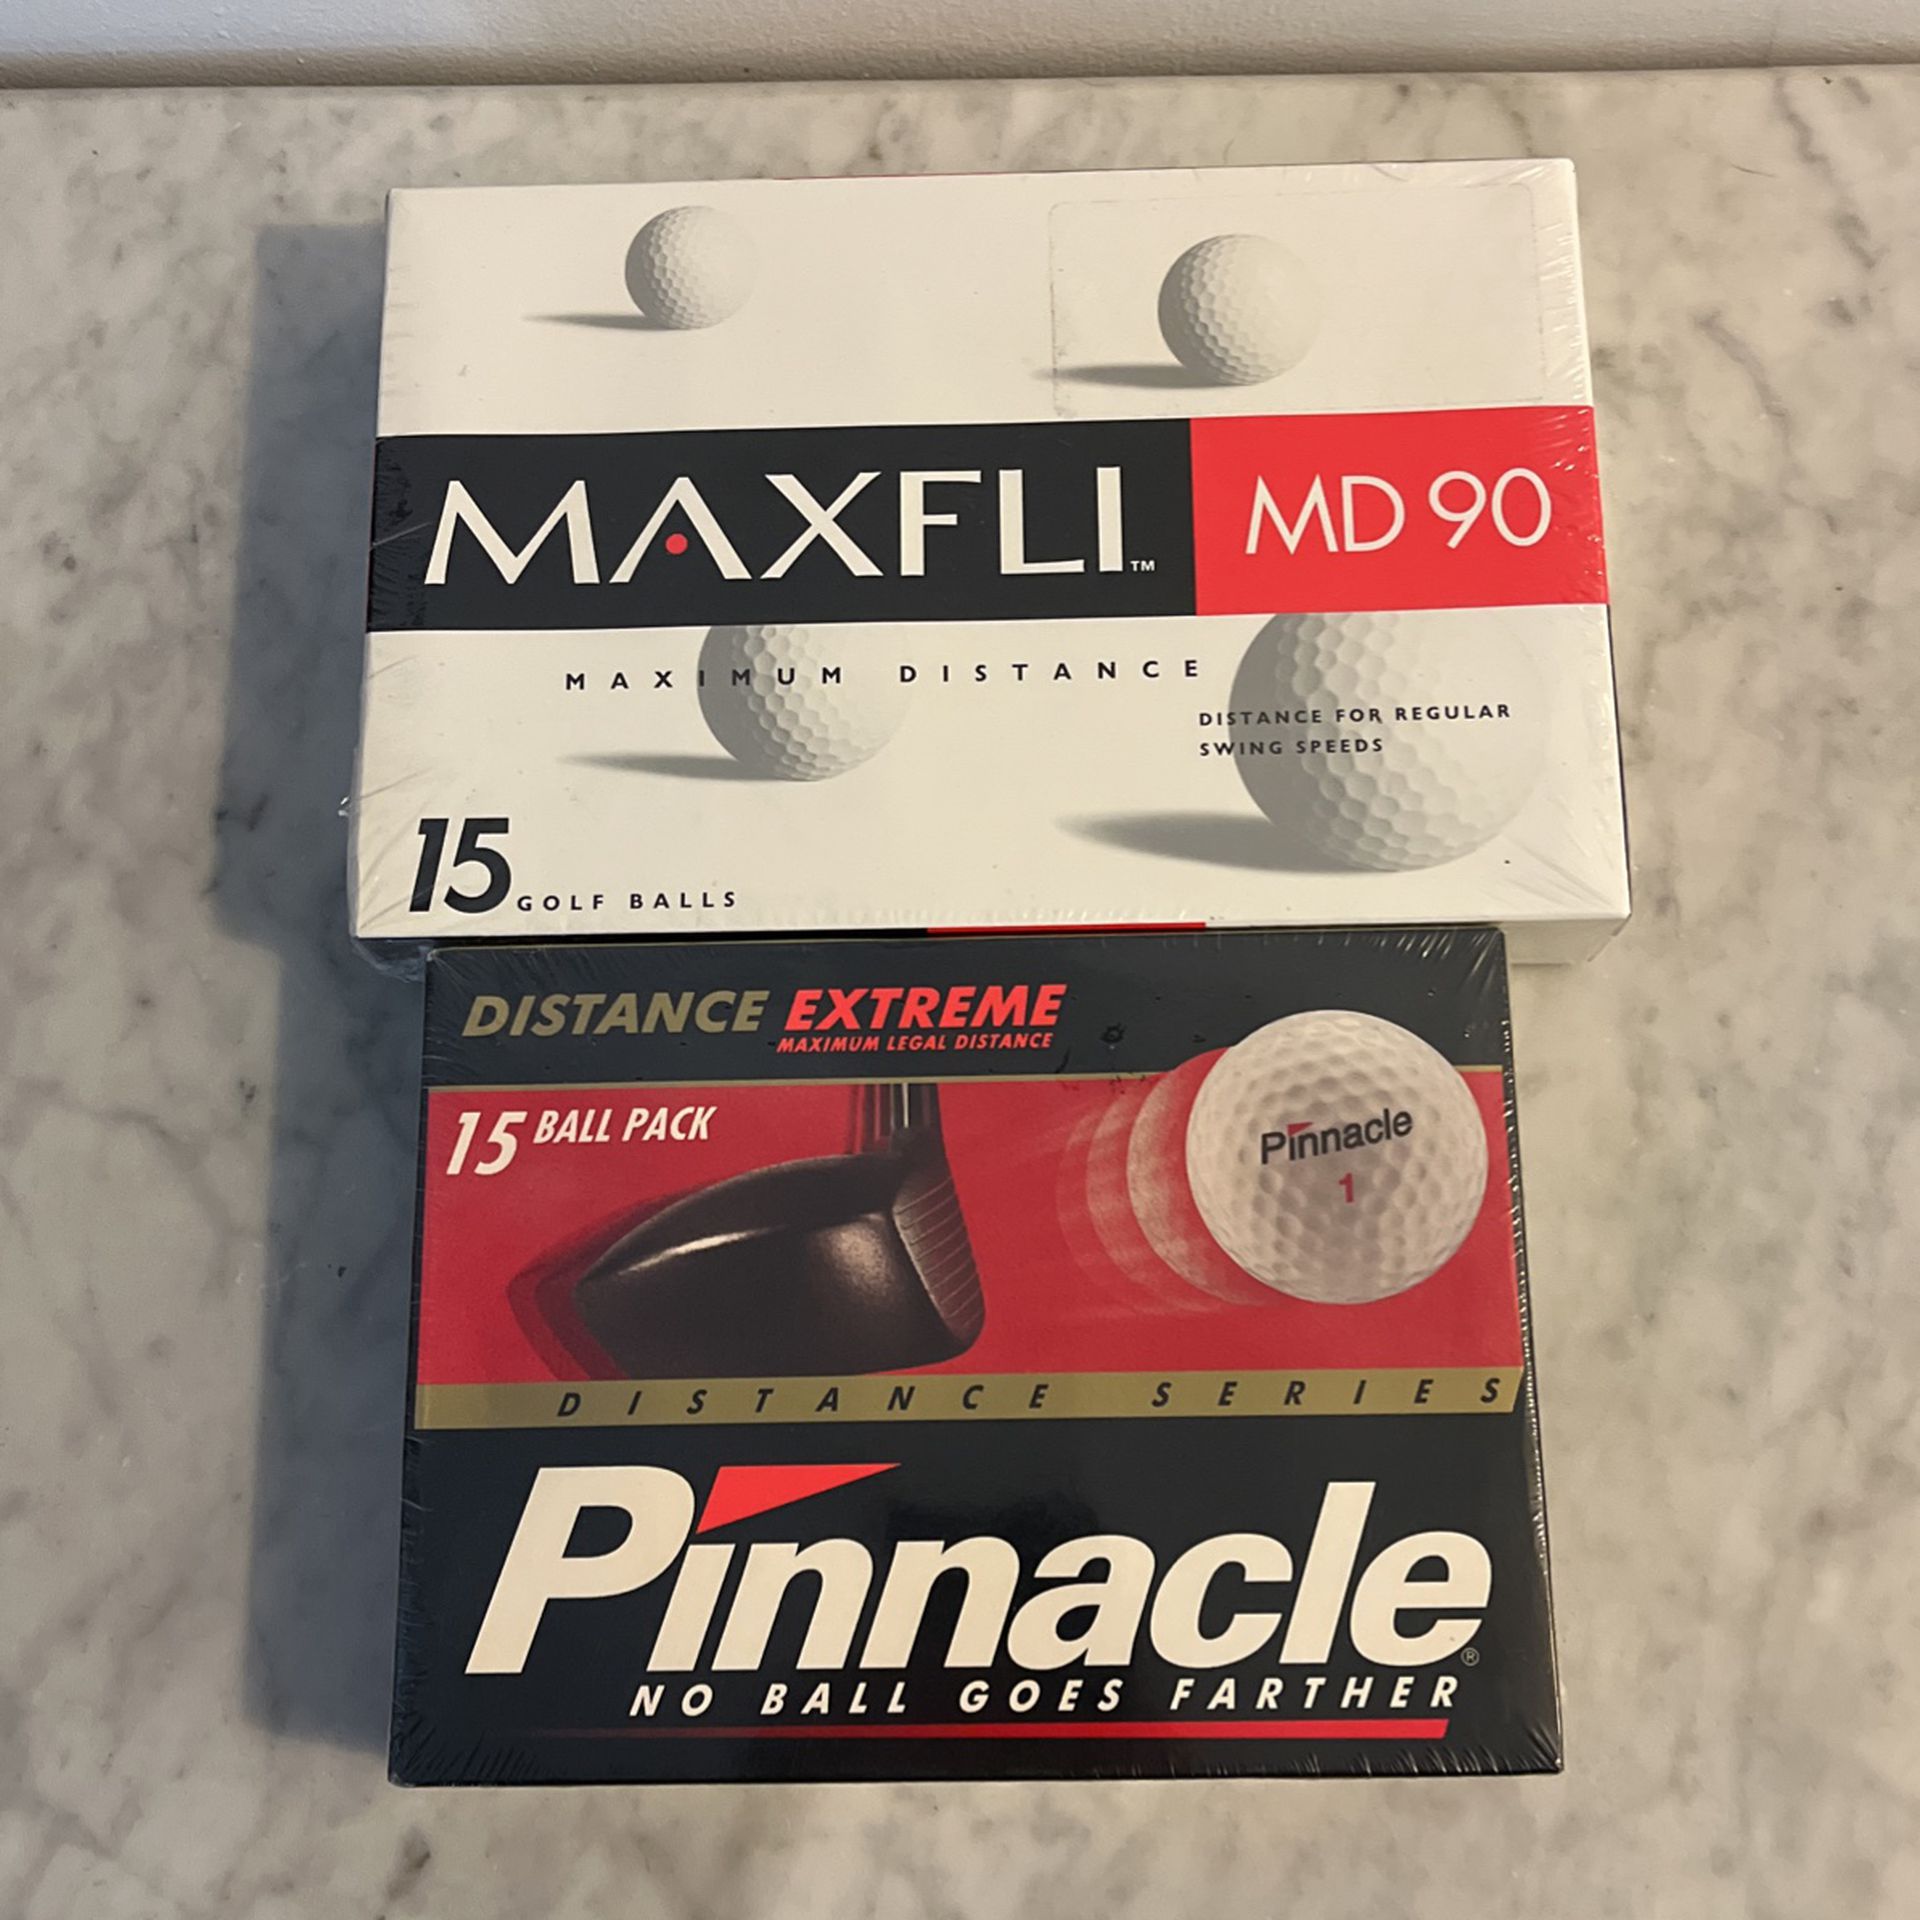 MAXIFLI MD 90 & PINNACLE Golf Balls 30 Total Sealed Packaging Price Is For Both Boxes 